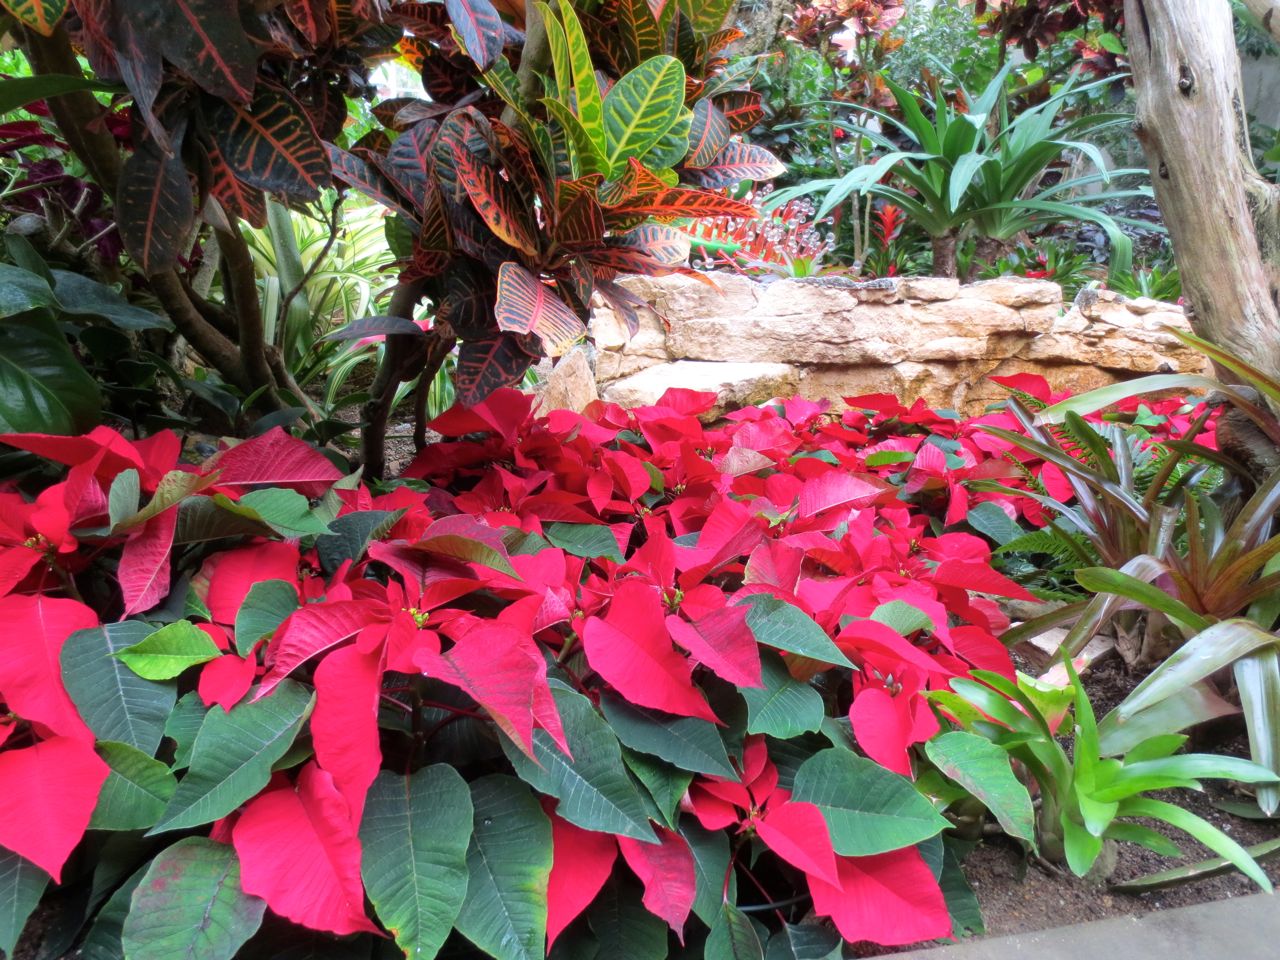 Poinsettias in the conservatory - Holidays in Bloom at the San Antonio Botanical Garden | San Antonio Charter Moms